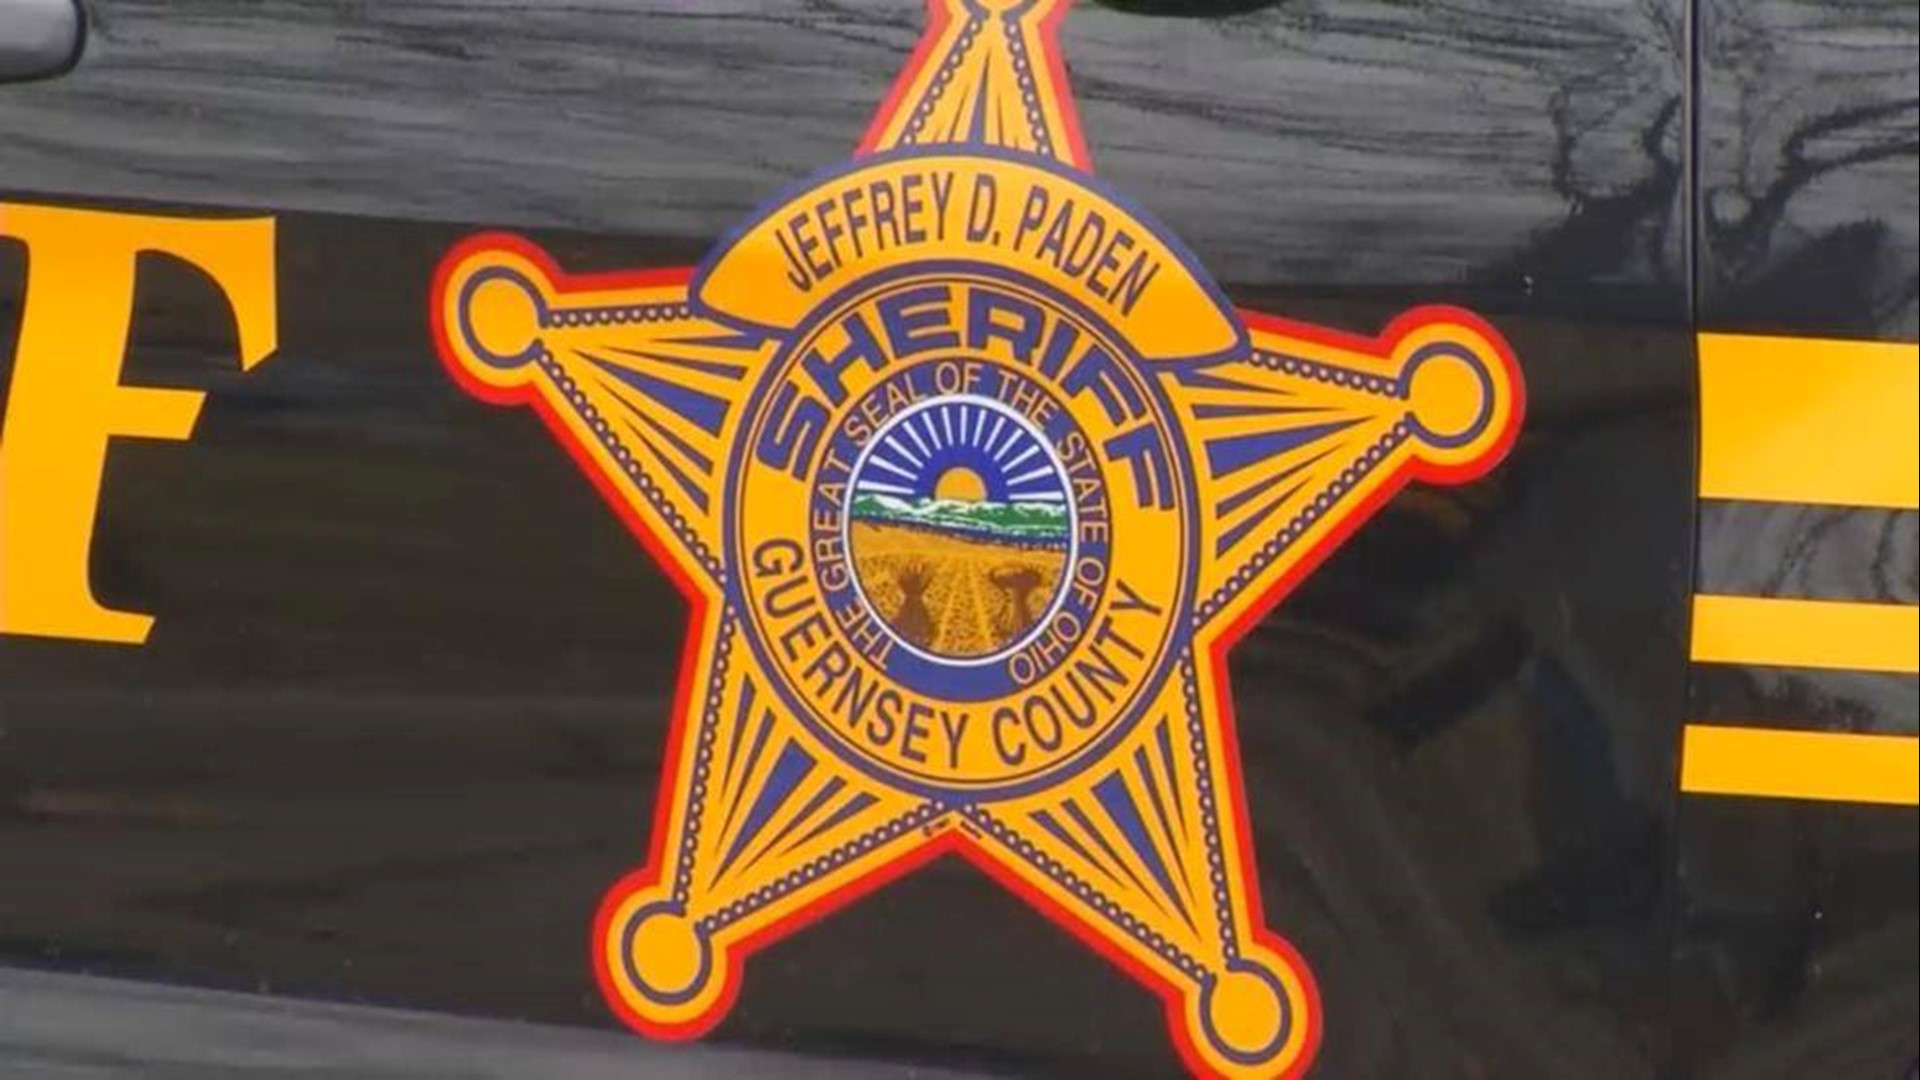 Guernsey County Sheriff Jeffrey Paden said the 47-year-old Barnesville woman was wanted for assaulting a police officer.